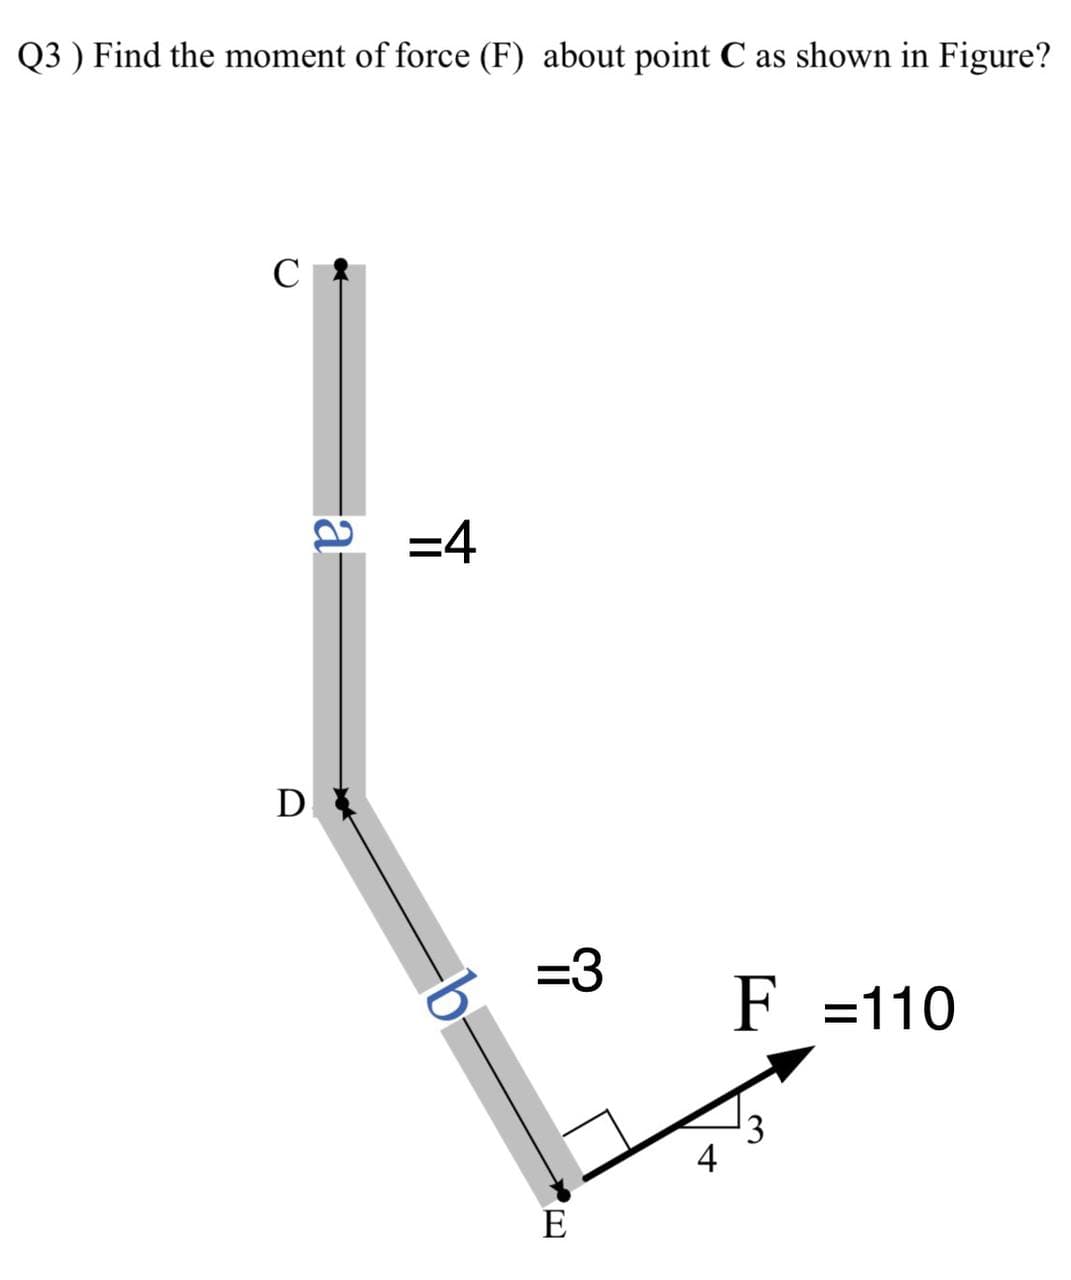 Q3 ) Find the moment of force (F) about point C as shown in Figure?
C
e =4
D
3D3
F =110
4
E
